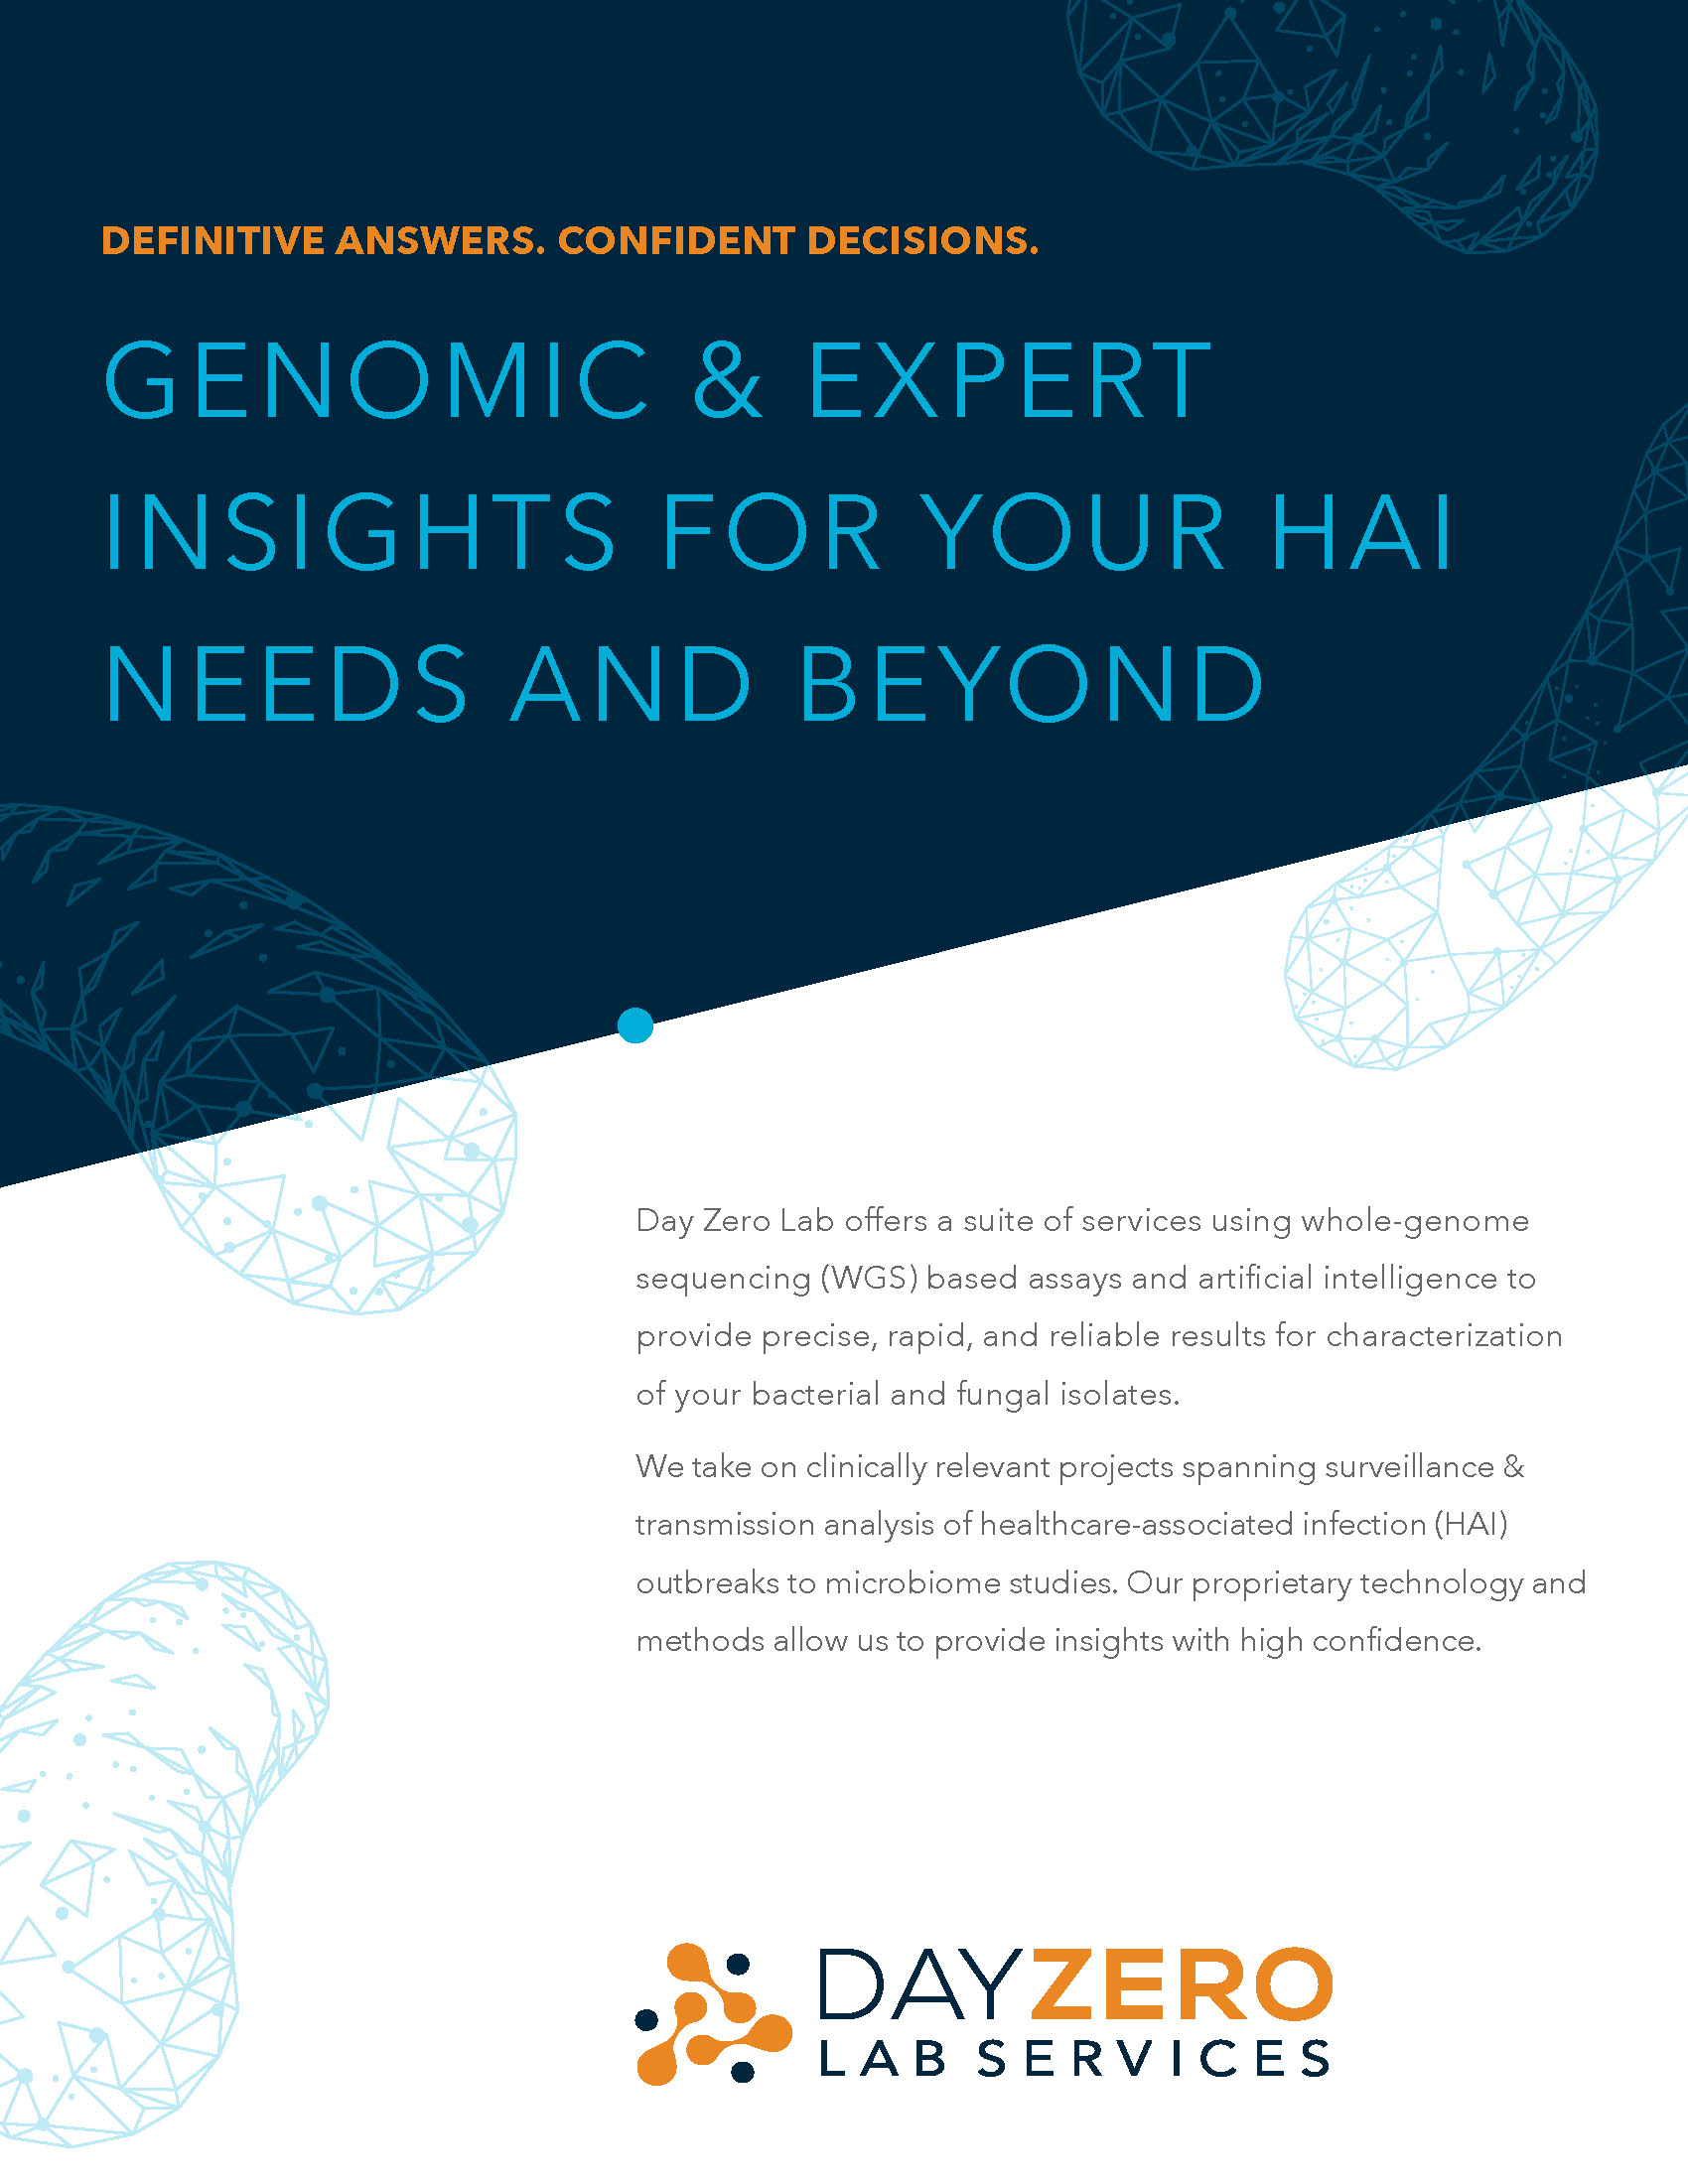 GENOMIC & EXPERT<br />
INSIGHTS FOR YOUR HAI NEEDS AND BEYOND